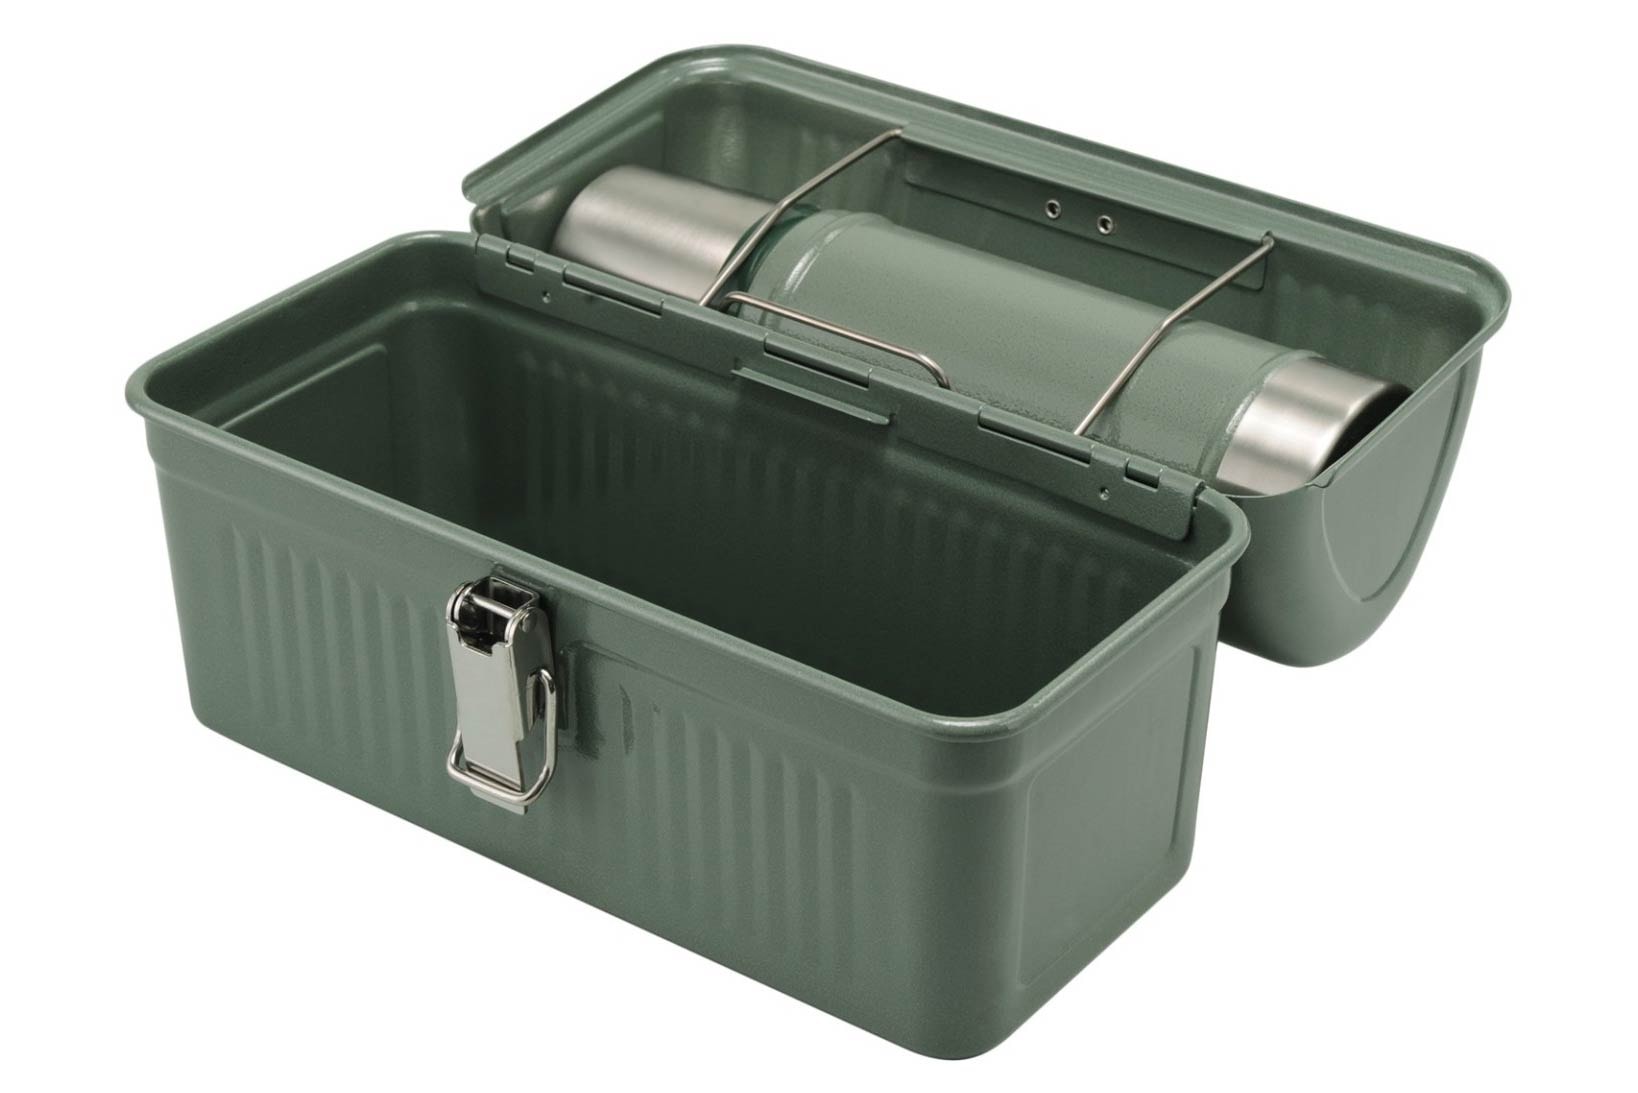 STANLEY CLASSIC SERIES CLASSIC LUNCH BOX ORGANIZER - Shop stanley